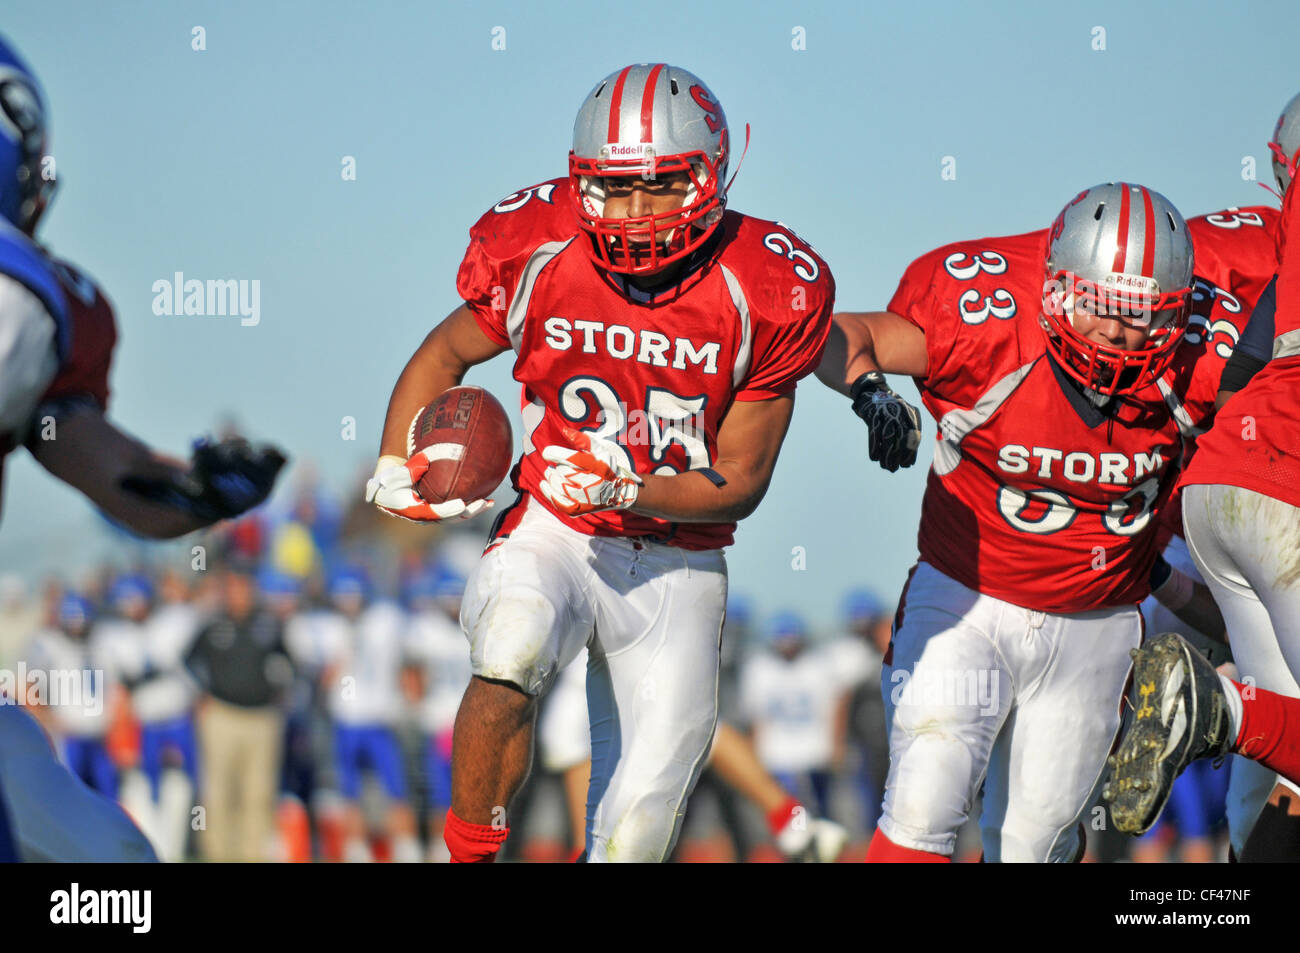 Running back being escorted into the end zone by his backfield running mate during a high school football game. USA. Stock Photo